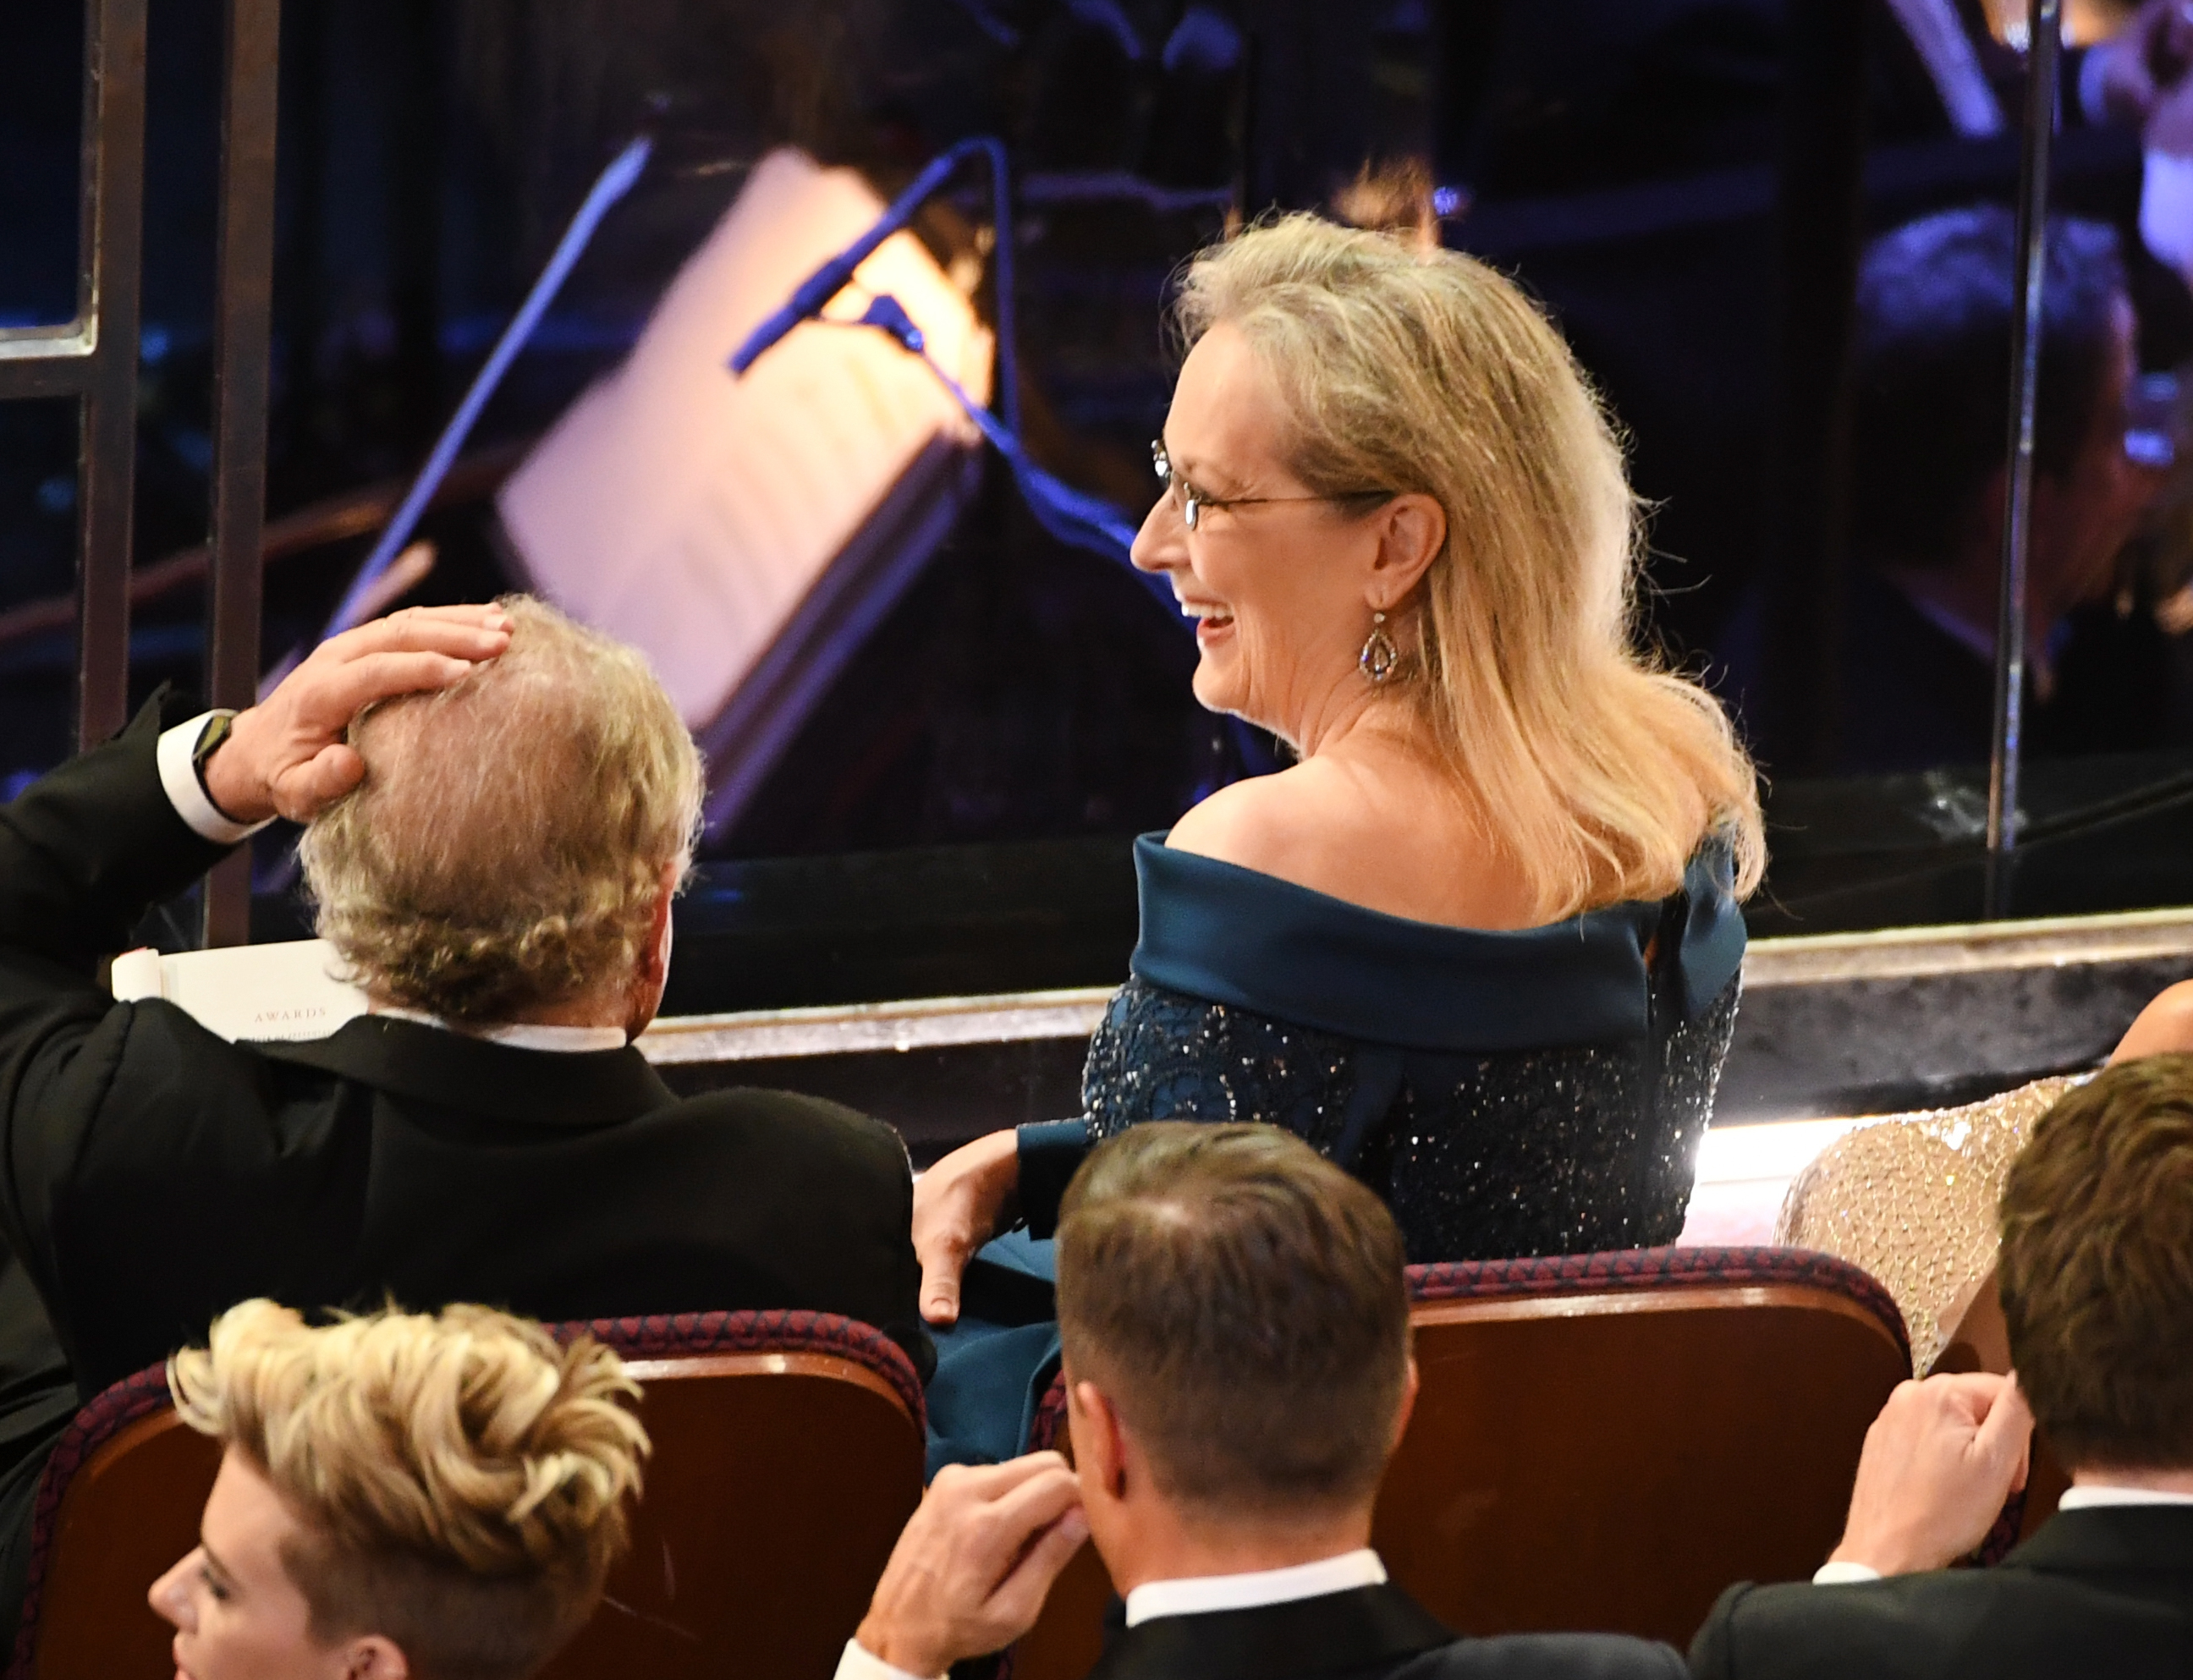 Don Gummer and Meryl Streep attend the 89th Annual Academy Awards at Hollywood & Highland Center on February 26, 2017 in Hollywood, California. | Source: Getty Images